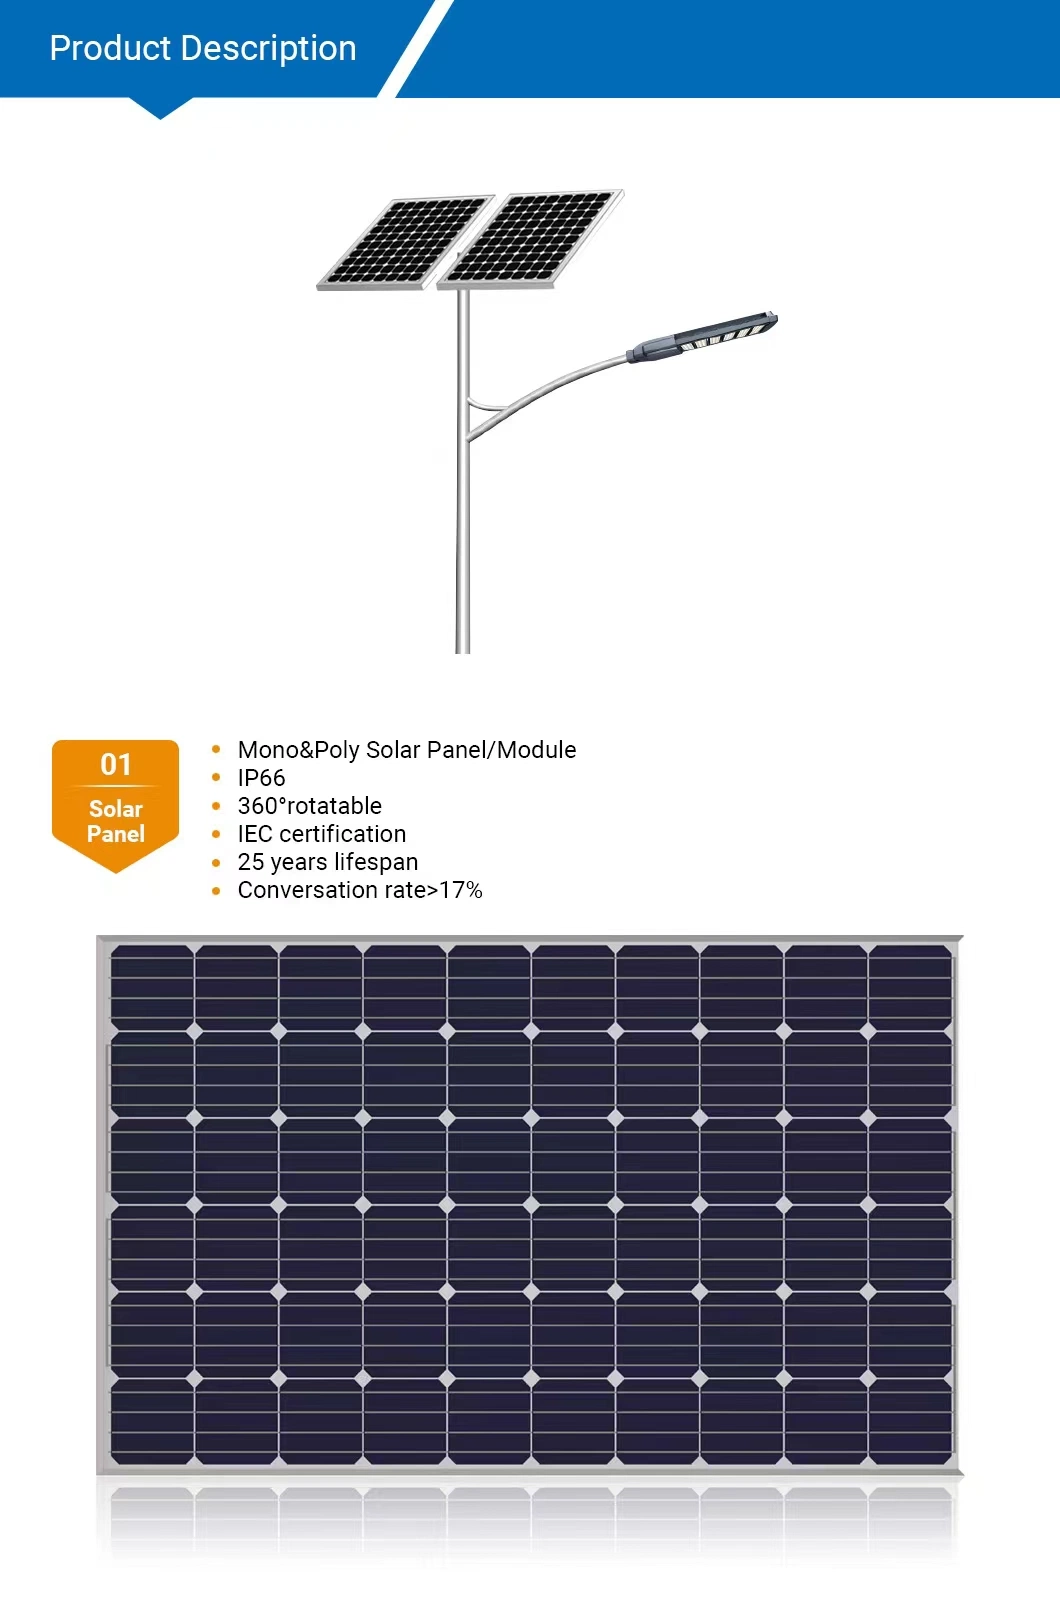 New LED Energy Lamp Pathway Lighting with Solar Panel System